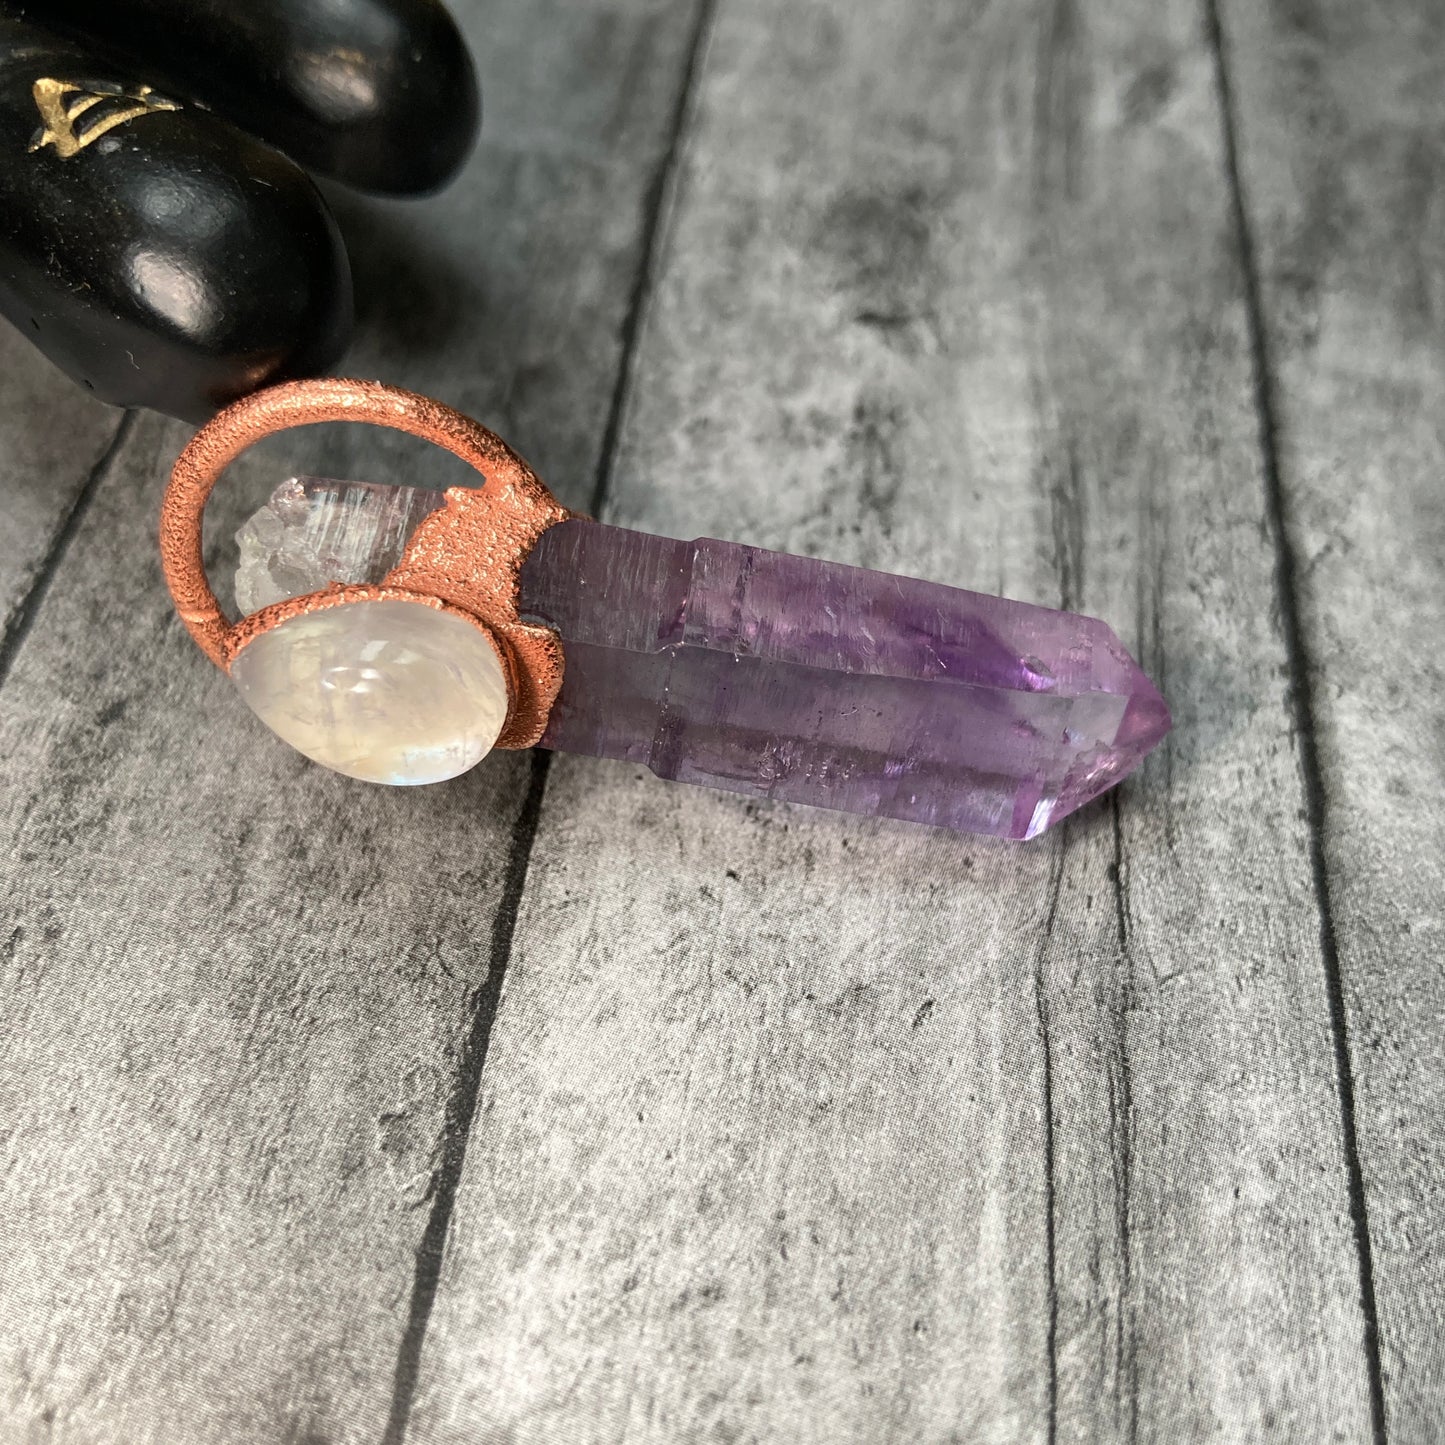 Amethyst Point Crystal Necklace